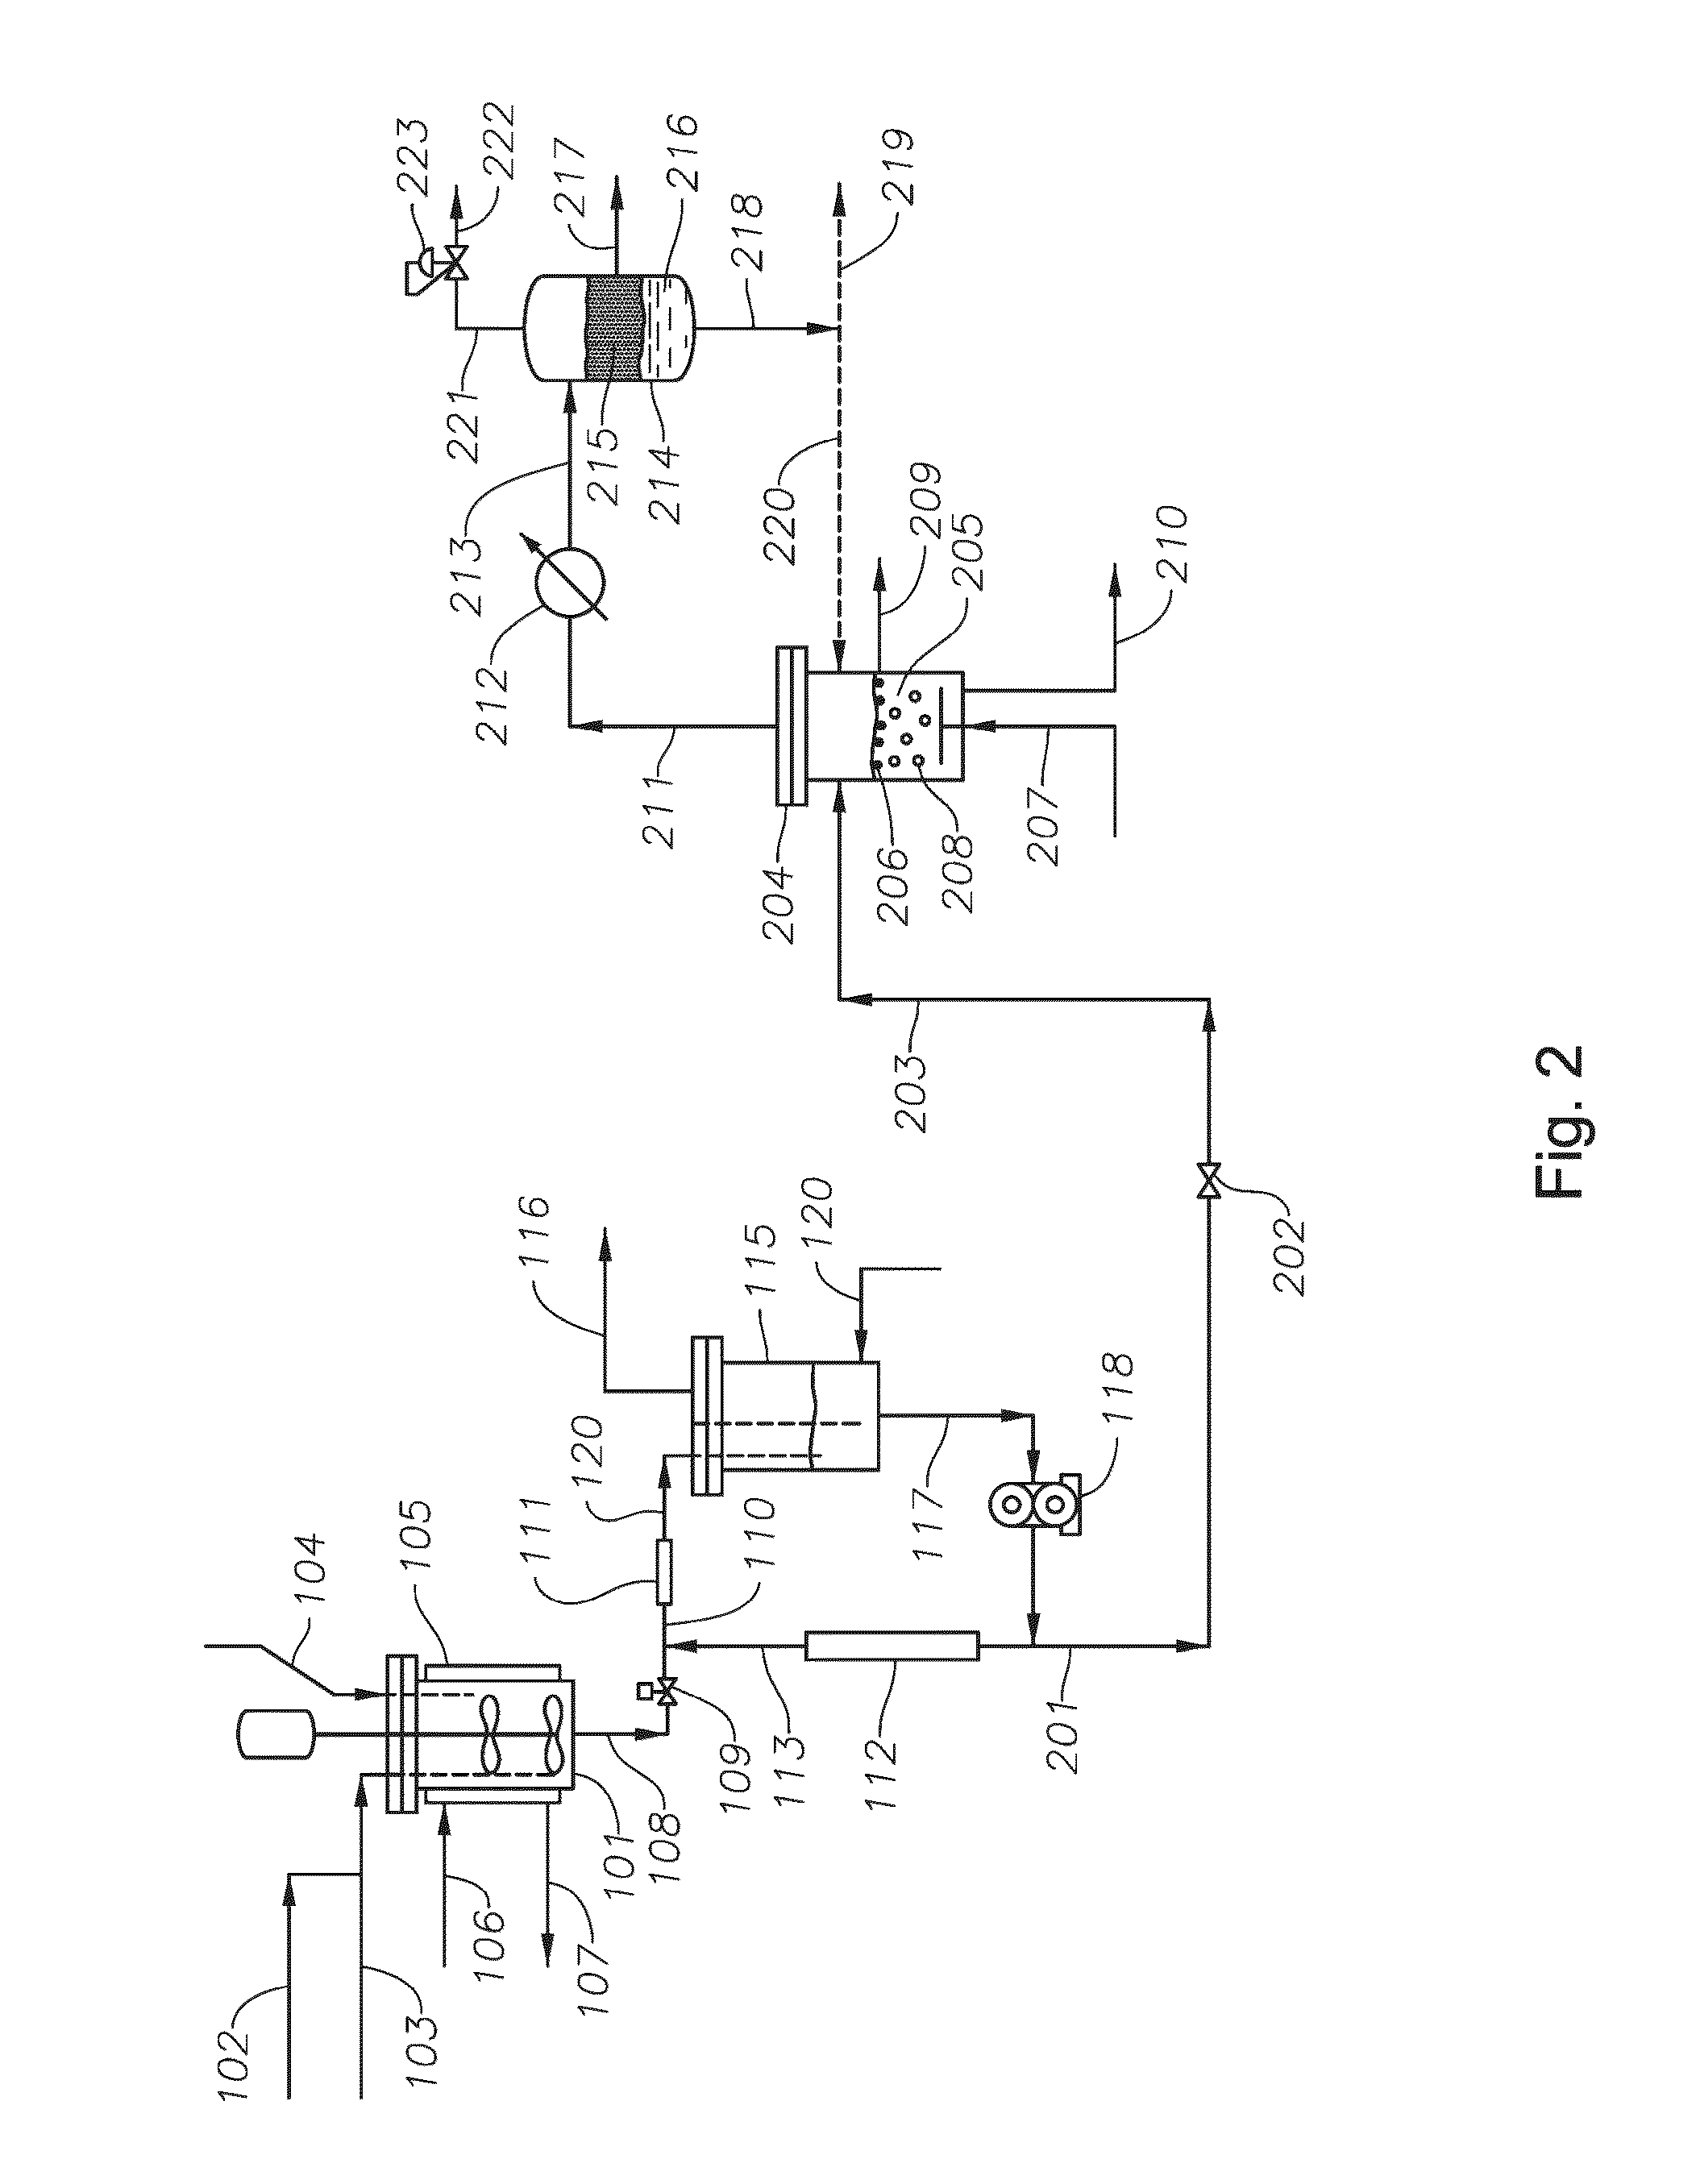 System and Method for Selective Trimerization